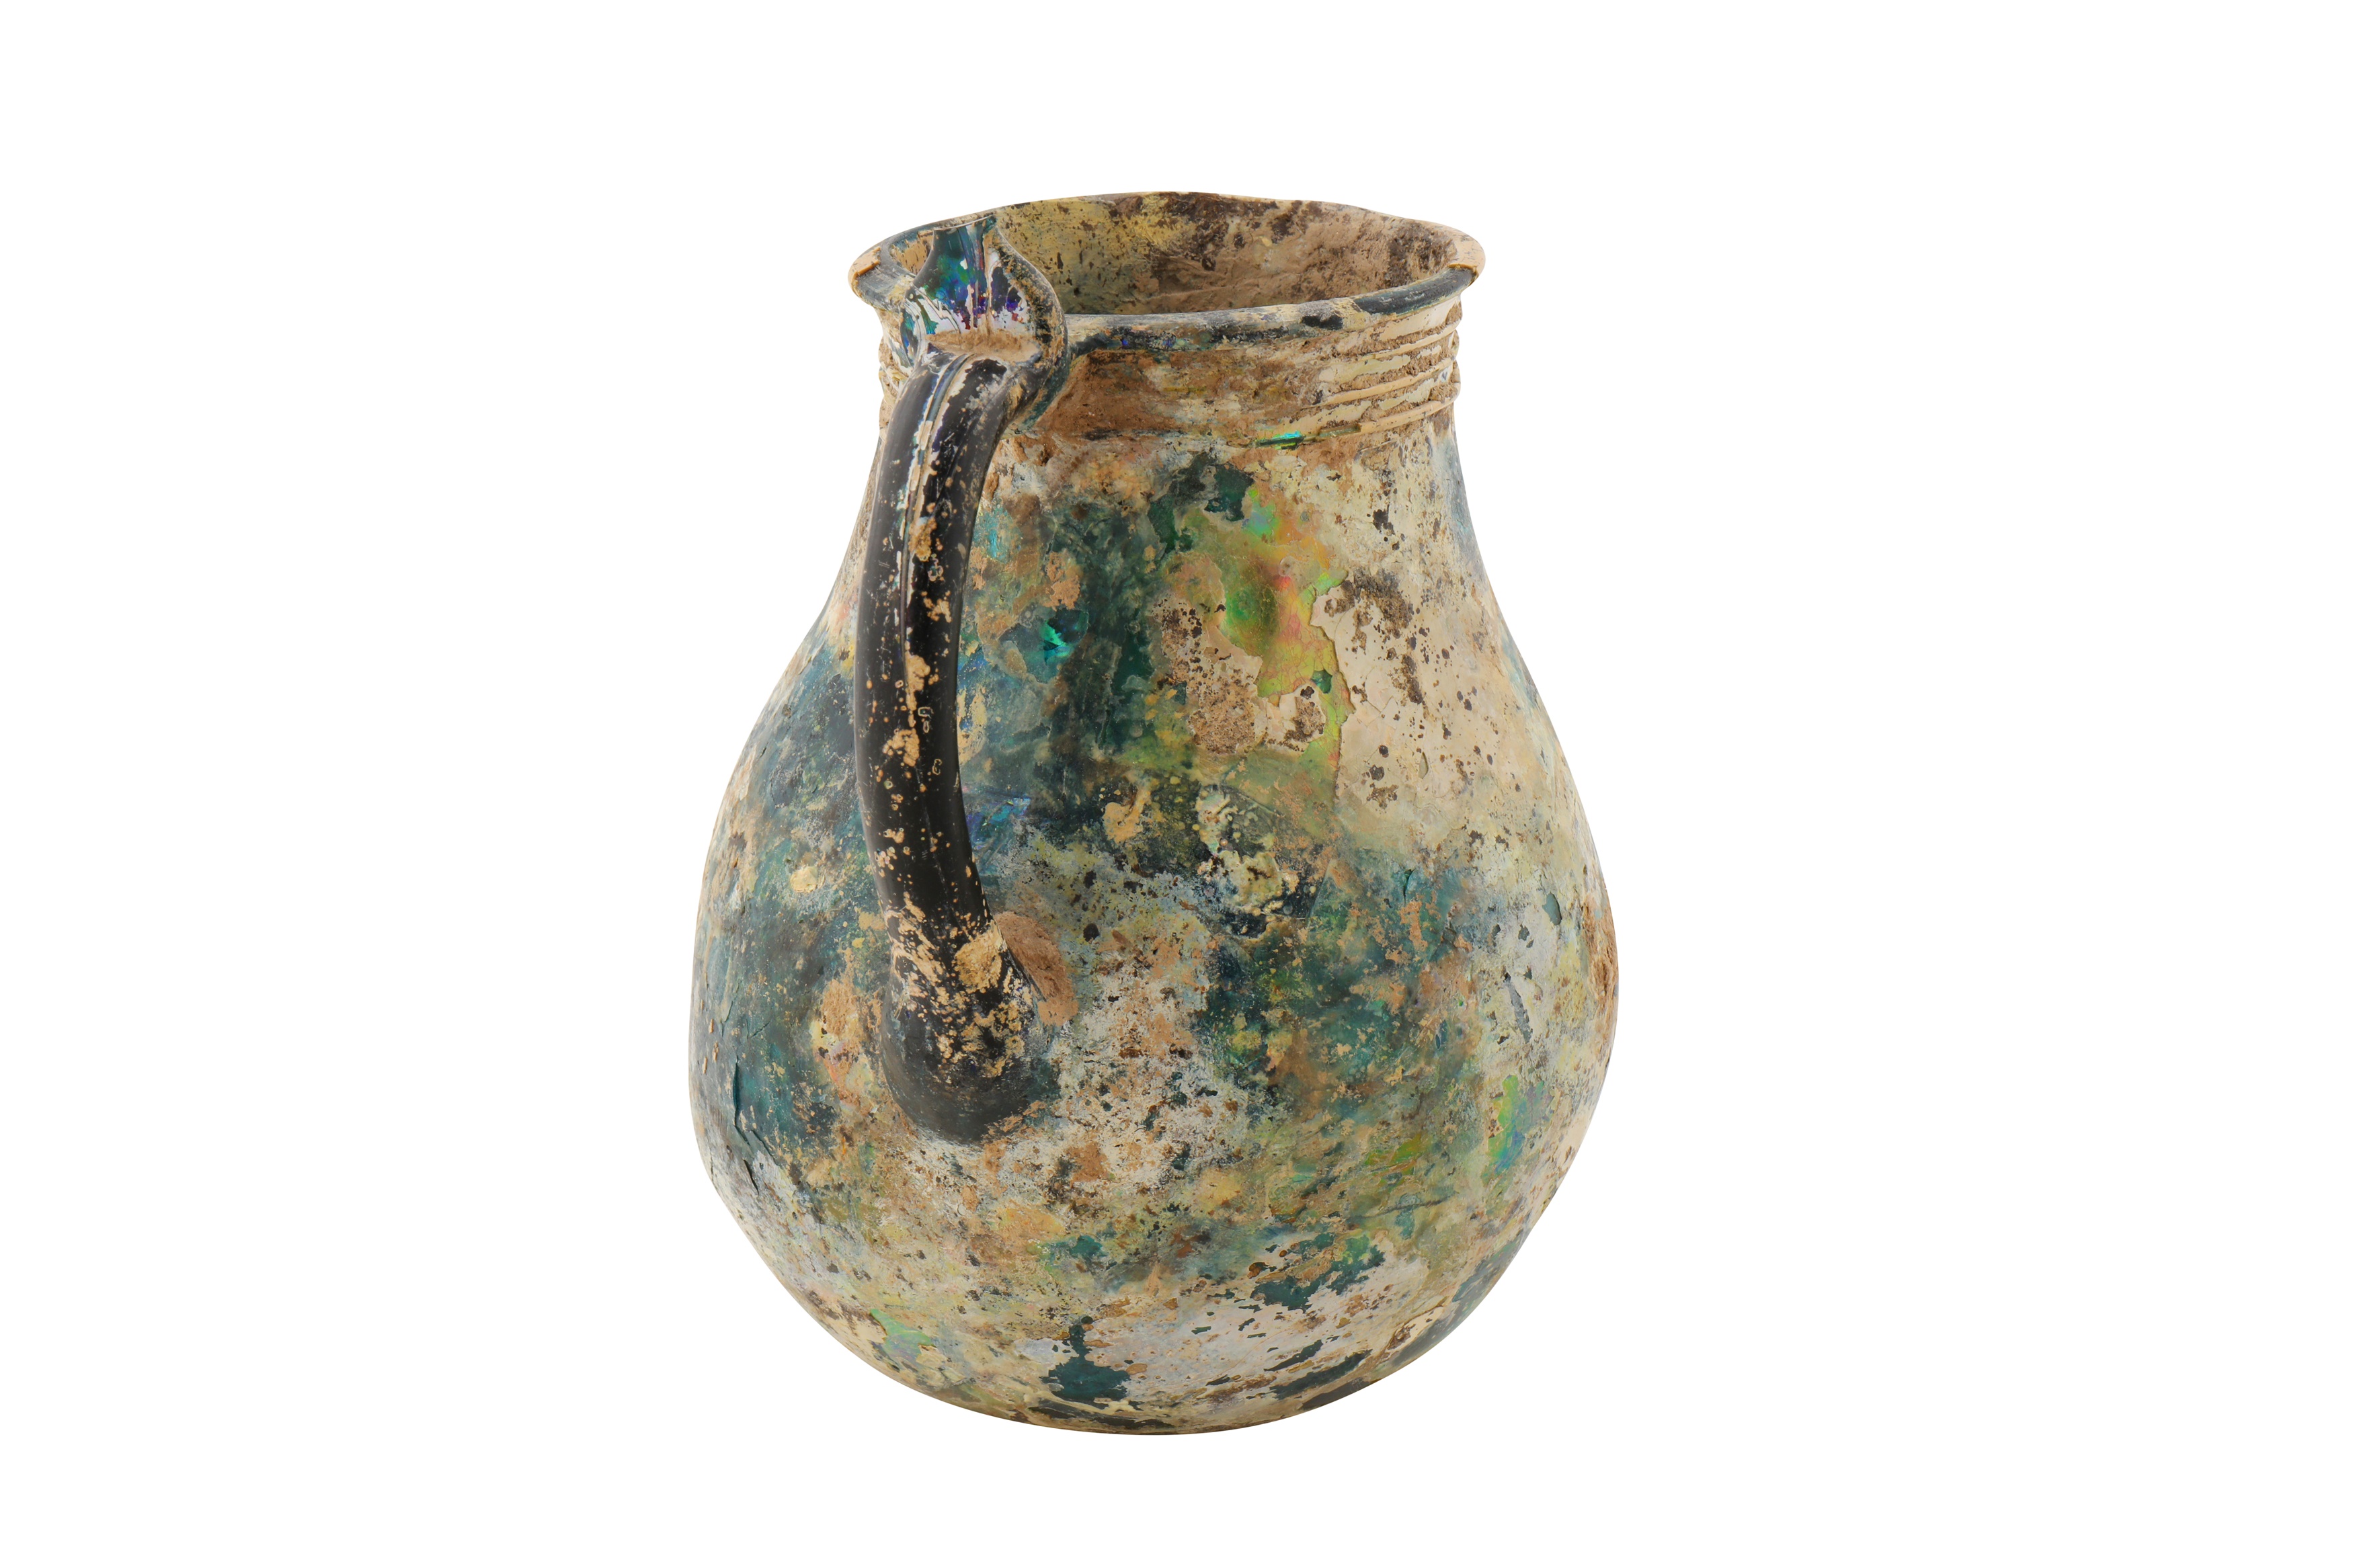 AN EARLY 10TH -12TH CENTURY IRIDESCENT GLASS VESSEL - Image 4 of 4